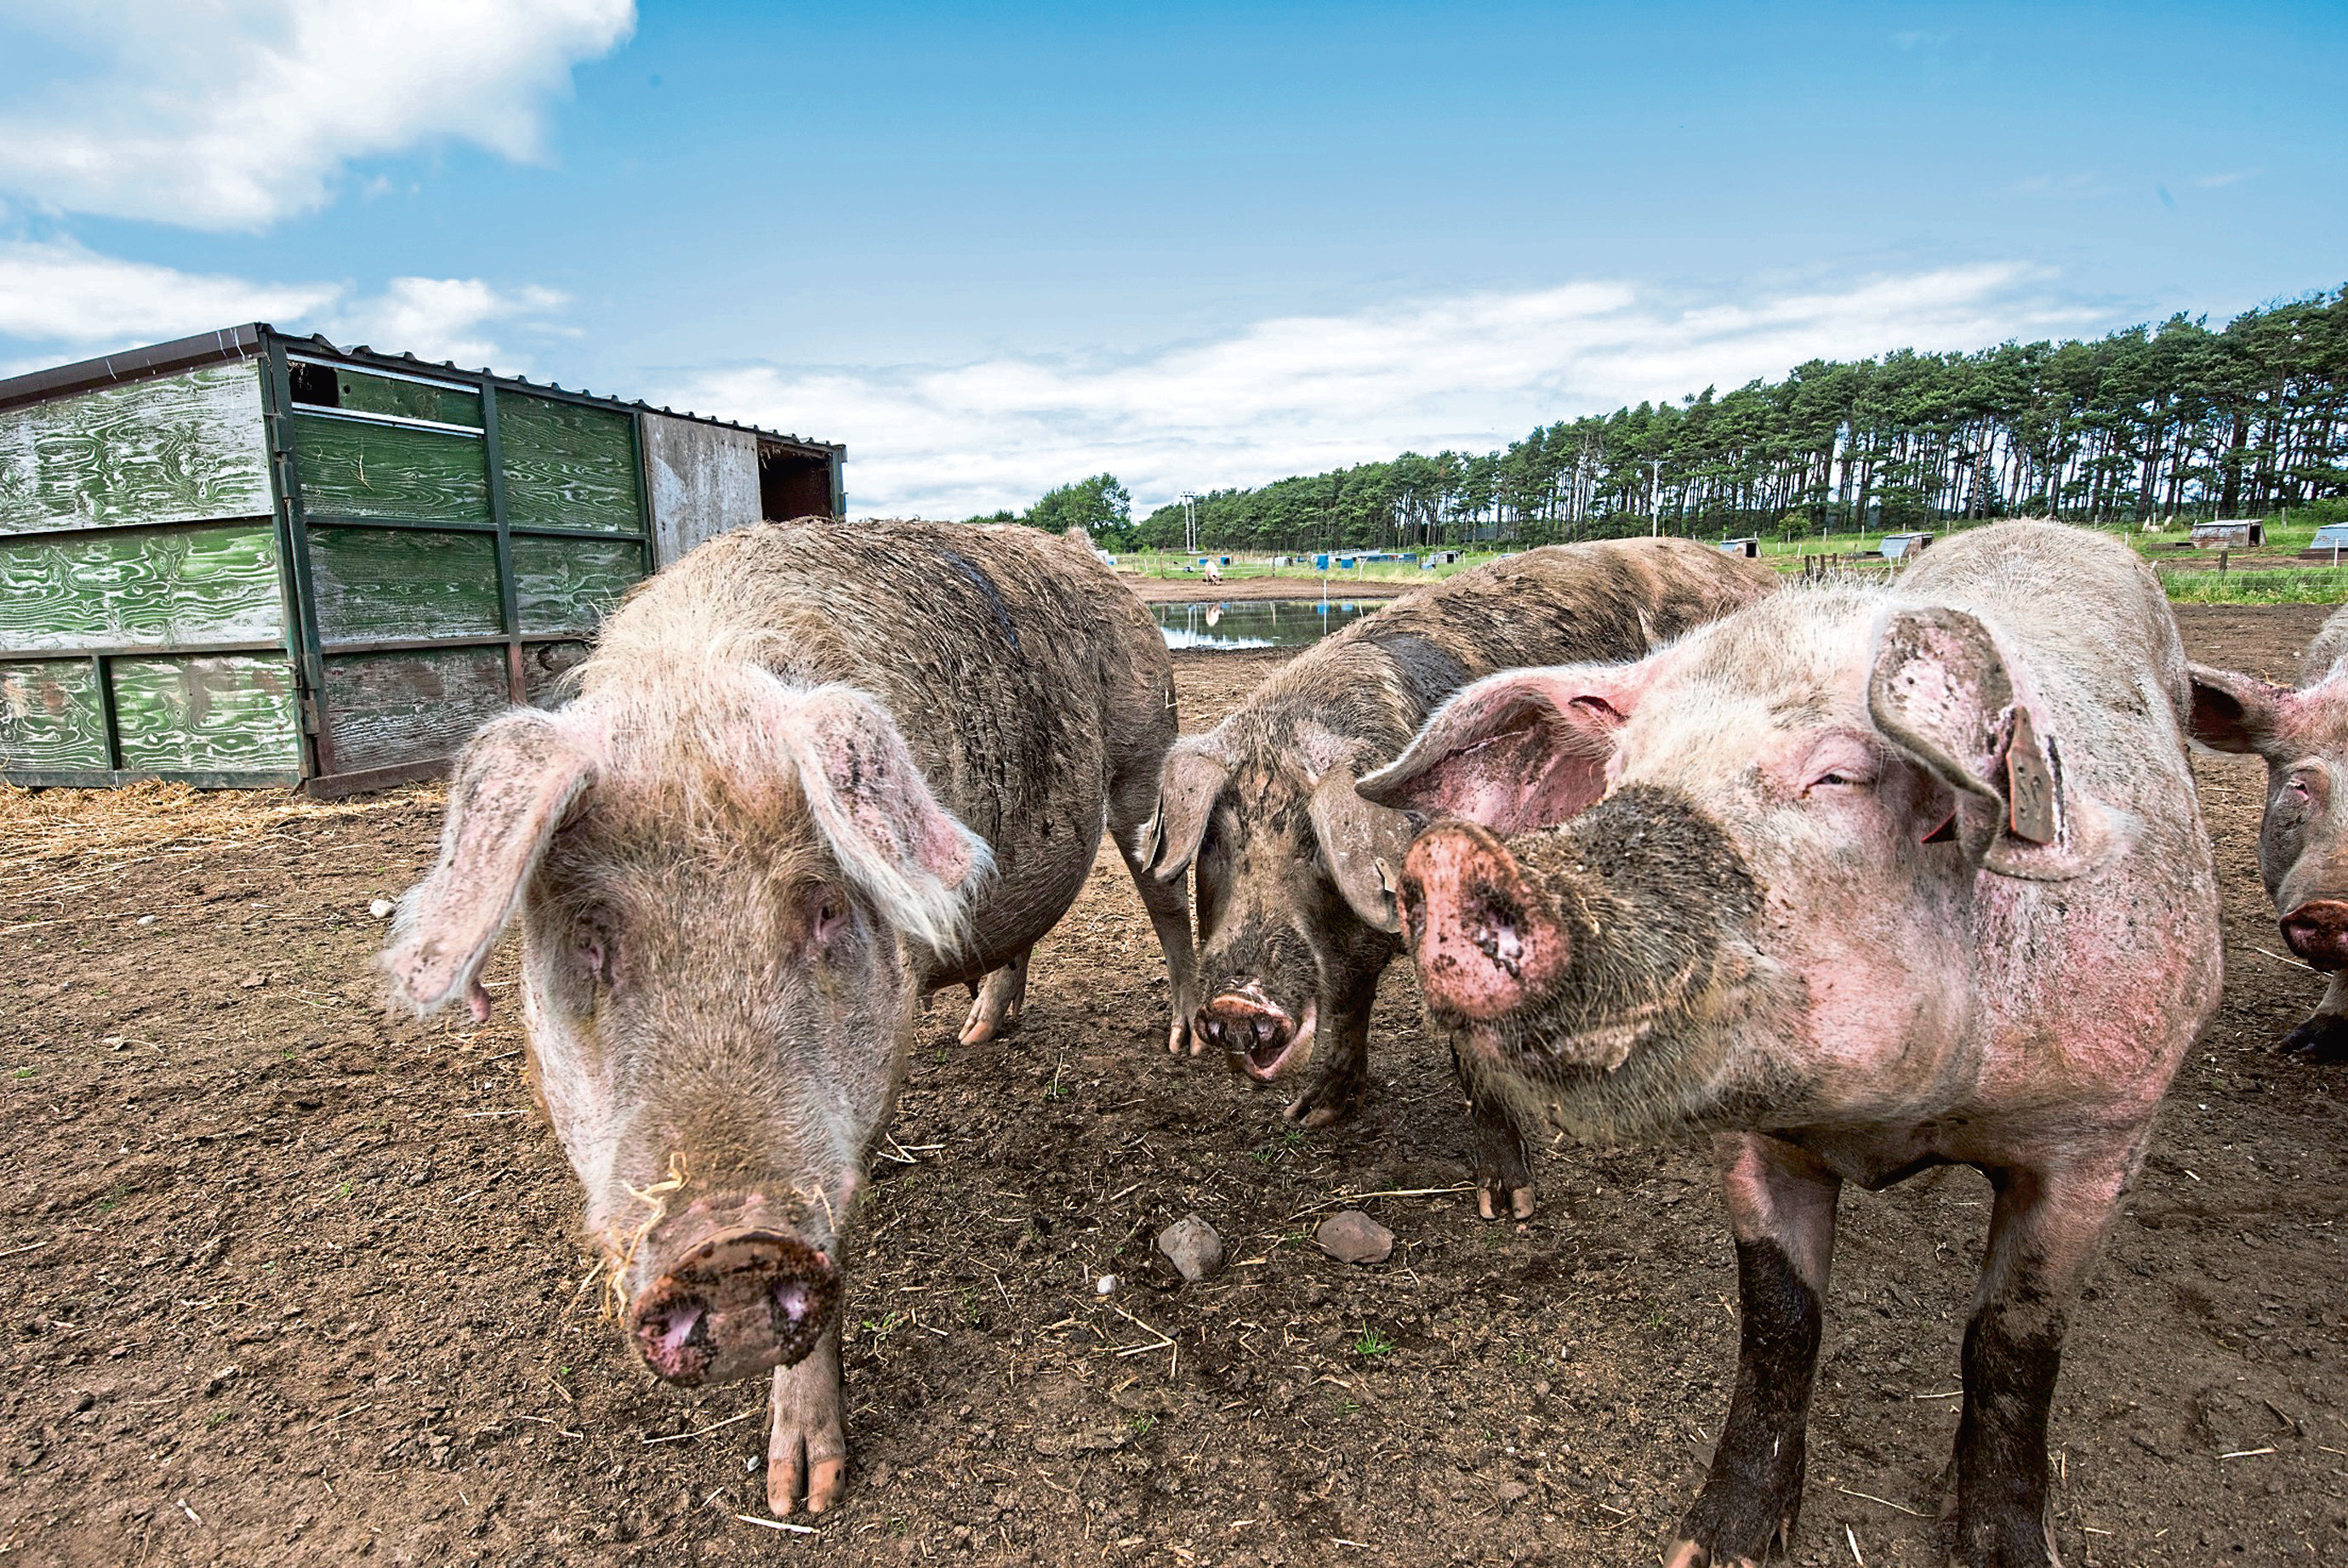 Pig producers were told to tell their high welfare story